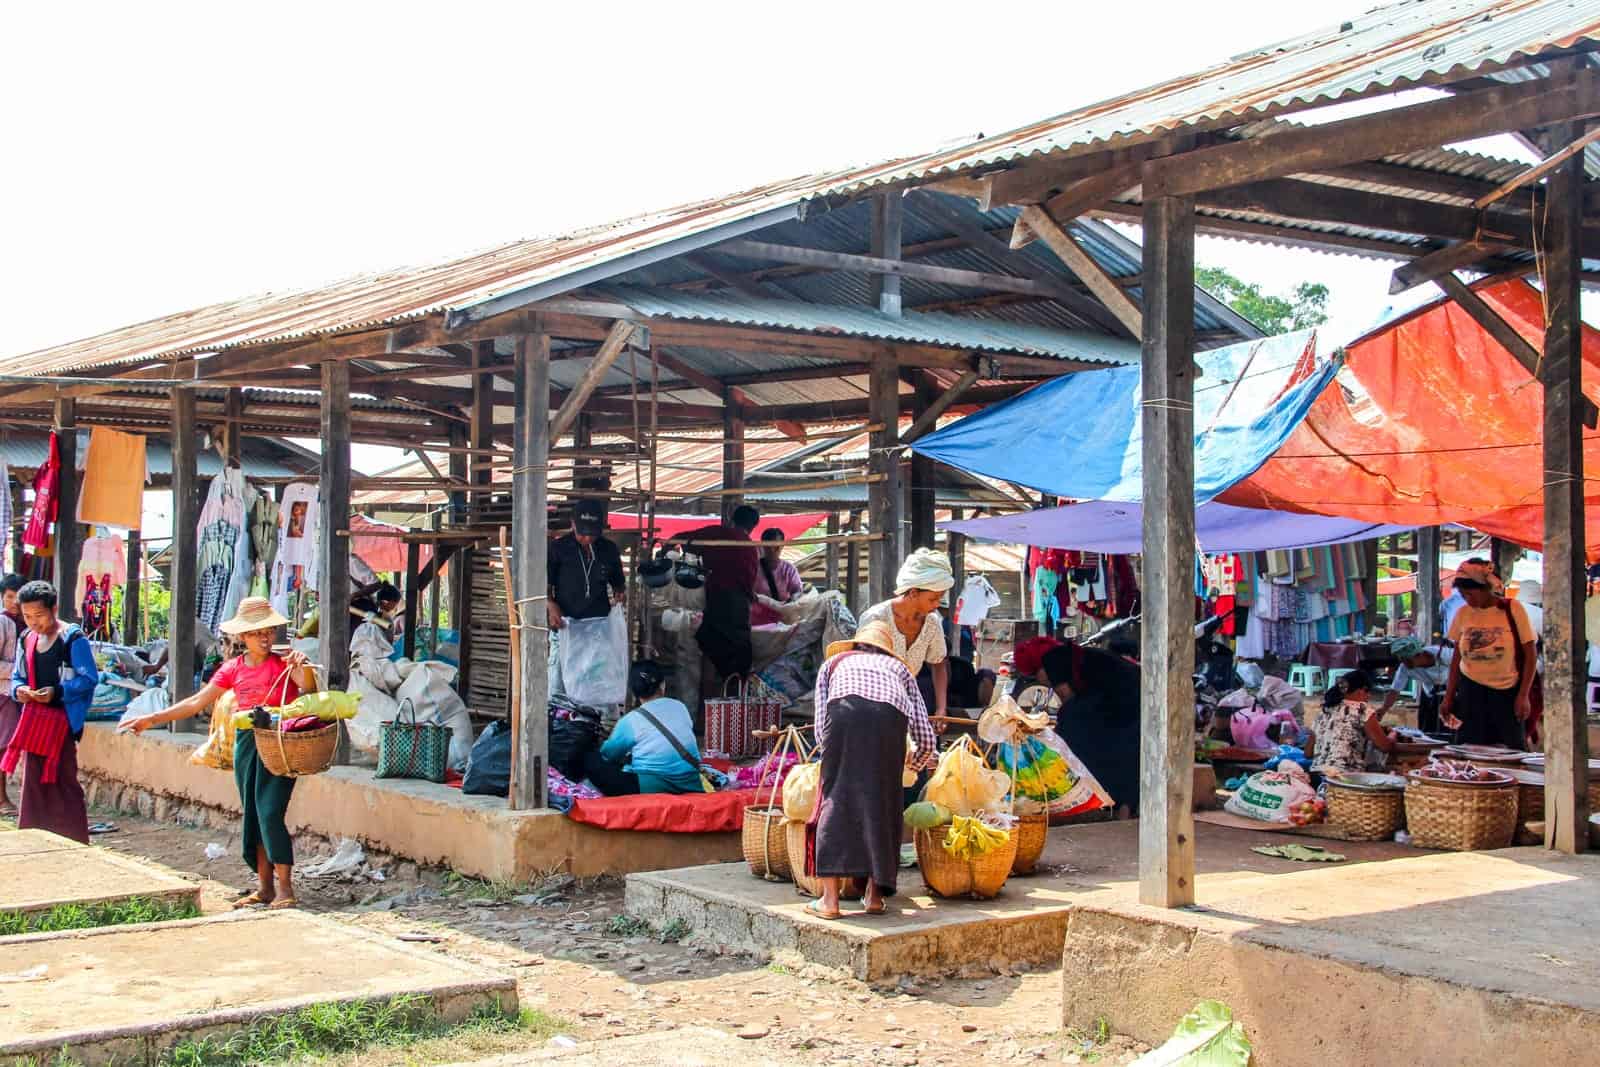 Two women tie bags of shopping onto a wooden carrying pole. They stand within an open spot of a busy covered market place in Myanmar full of people and goods.